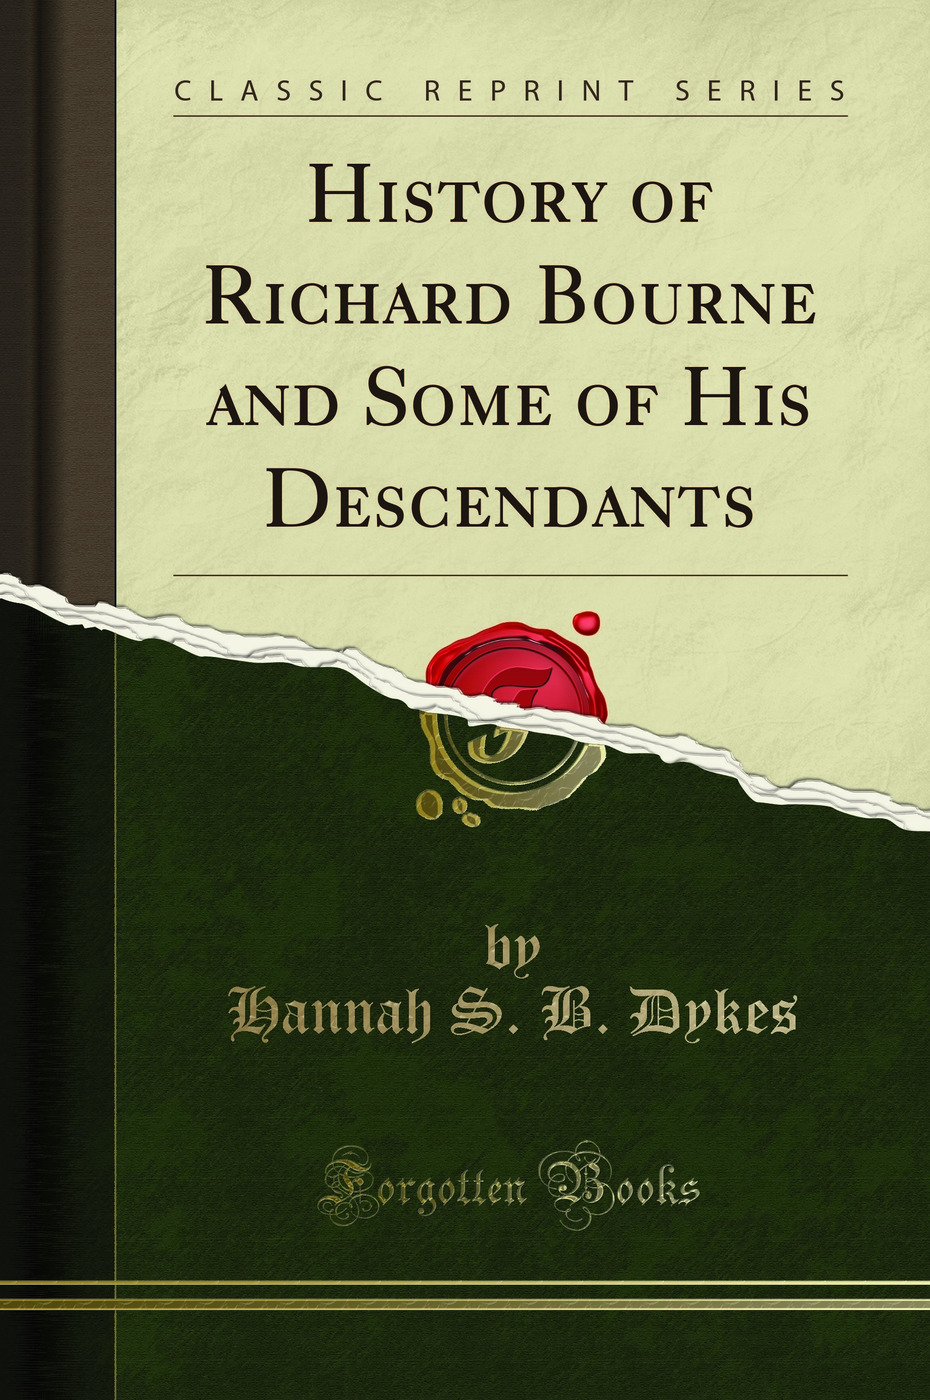 History of Richard Bourne and Some of His Descendants